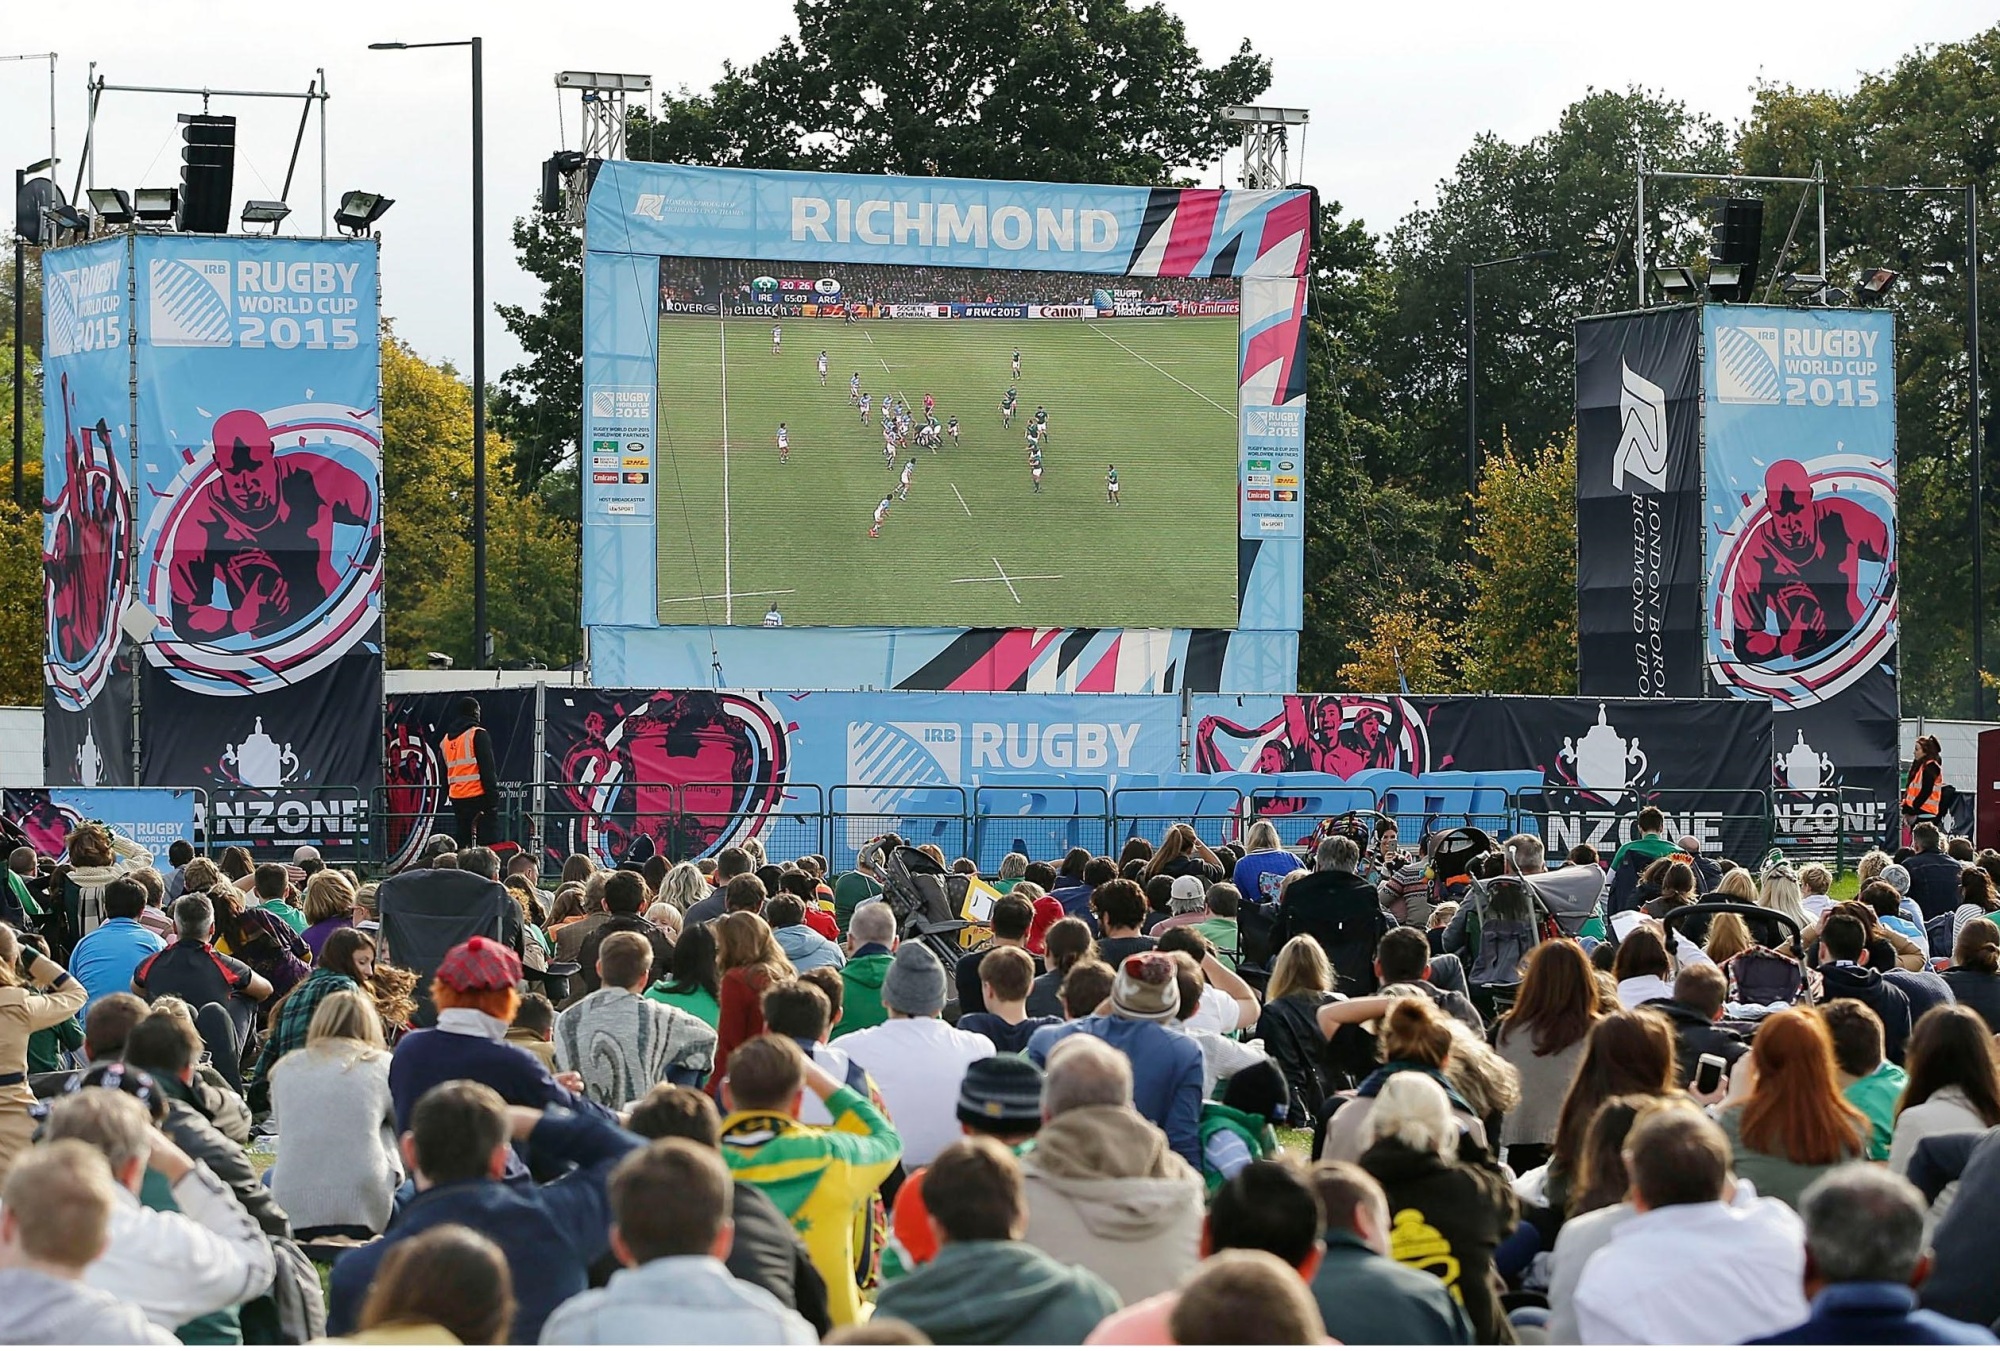 RWC organizers to set up 16 fan zones across Japan for live screenings of matches